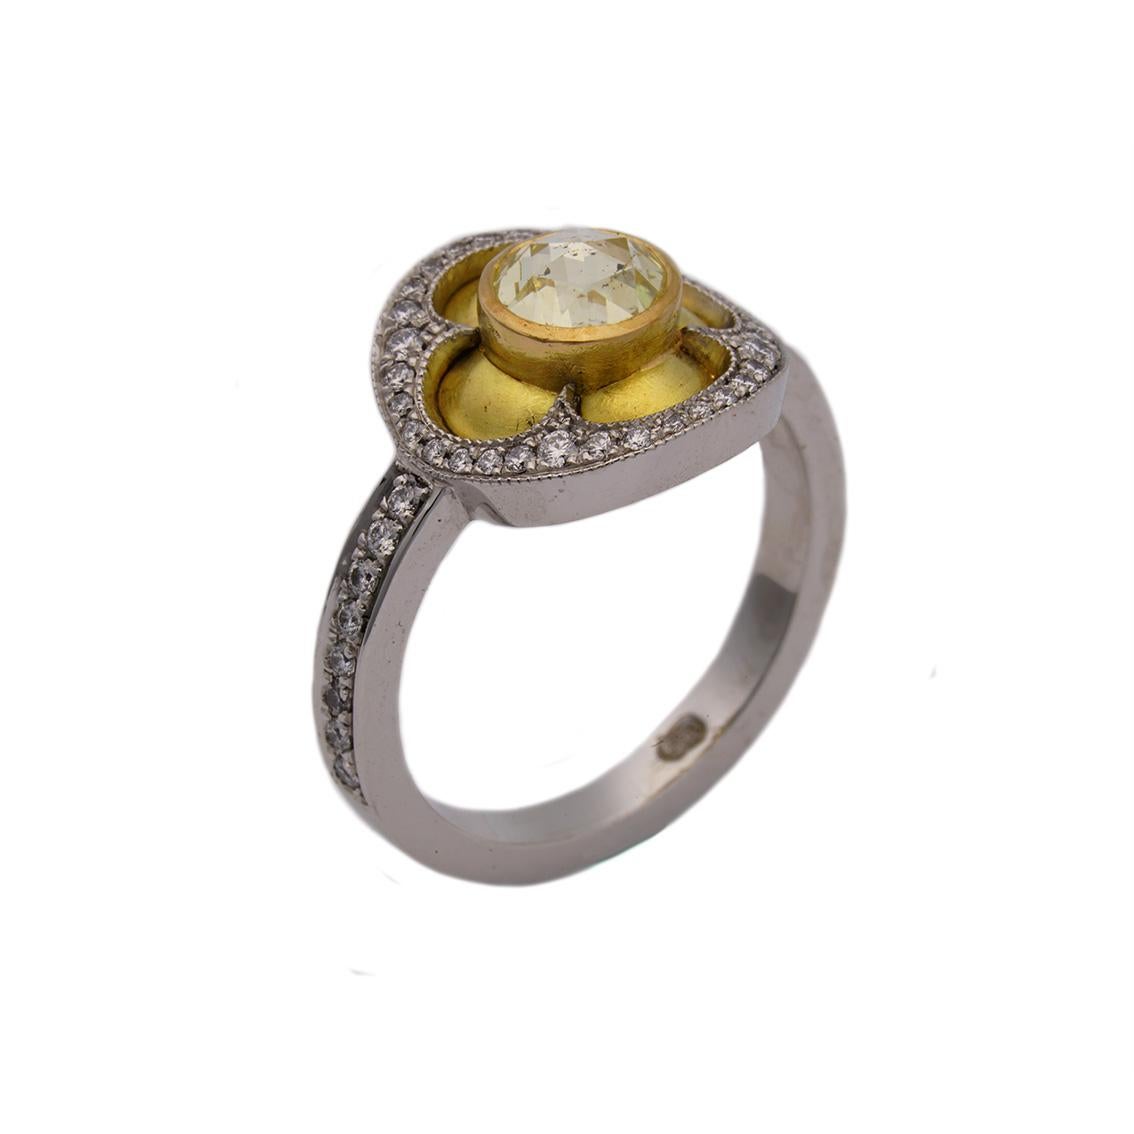 This 18kt gold ring is utter indulgence. 

Handmade from 18kt yellow and white gold this glorious ring has been inspired by the quatrefoil, a symbol used throughout Gothic architecture. 

This stunning ring features a central, bezel set, rose cut,